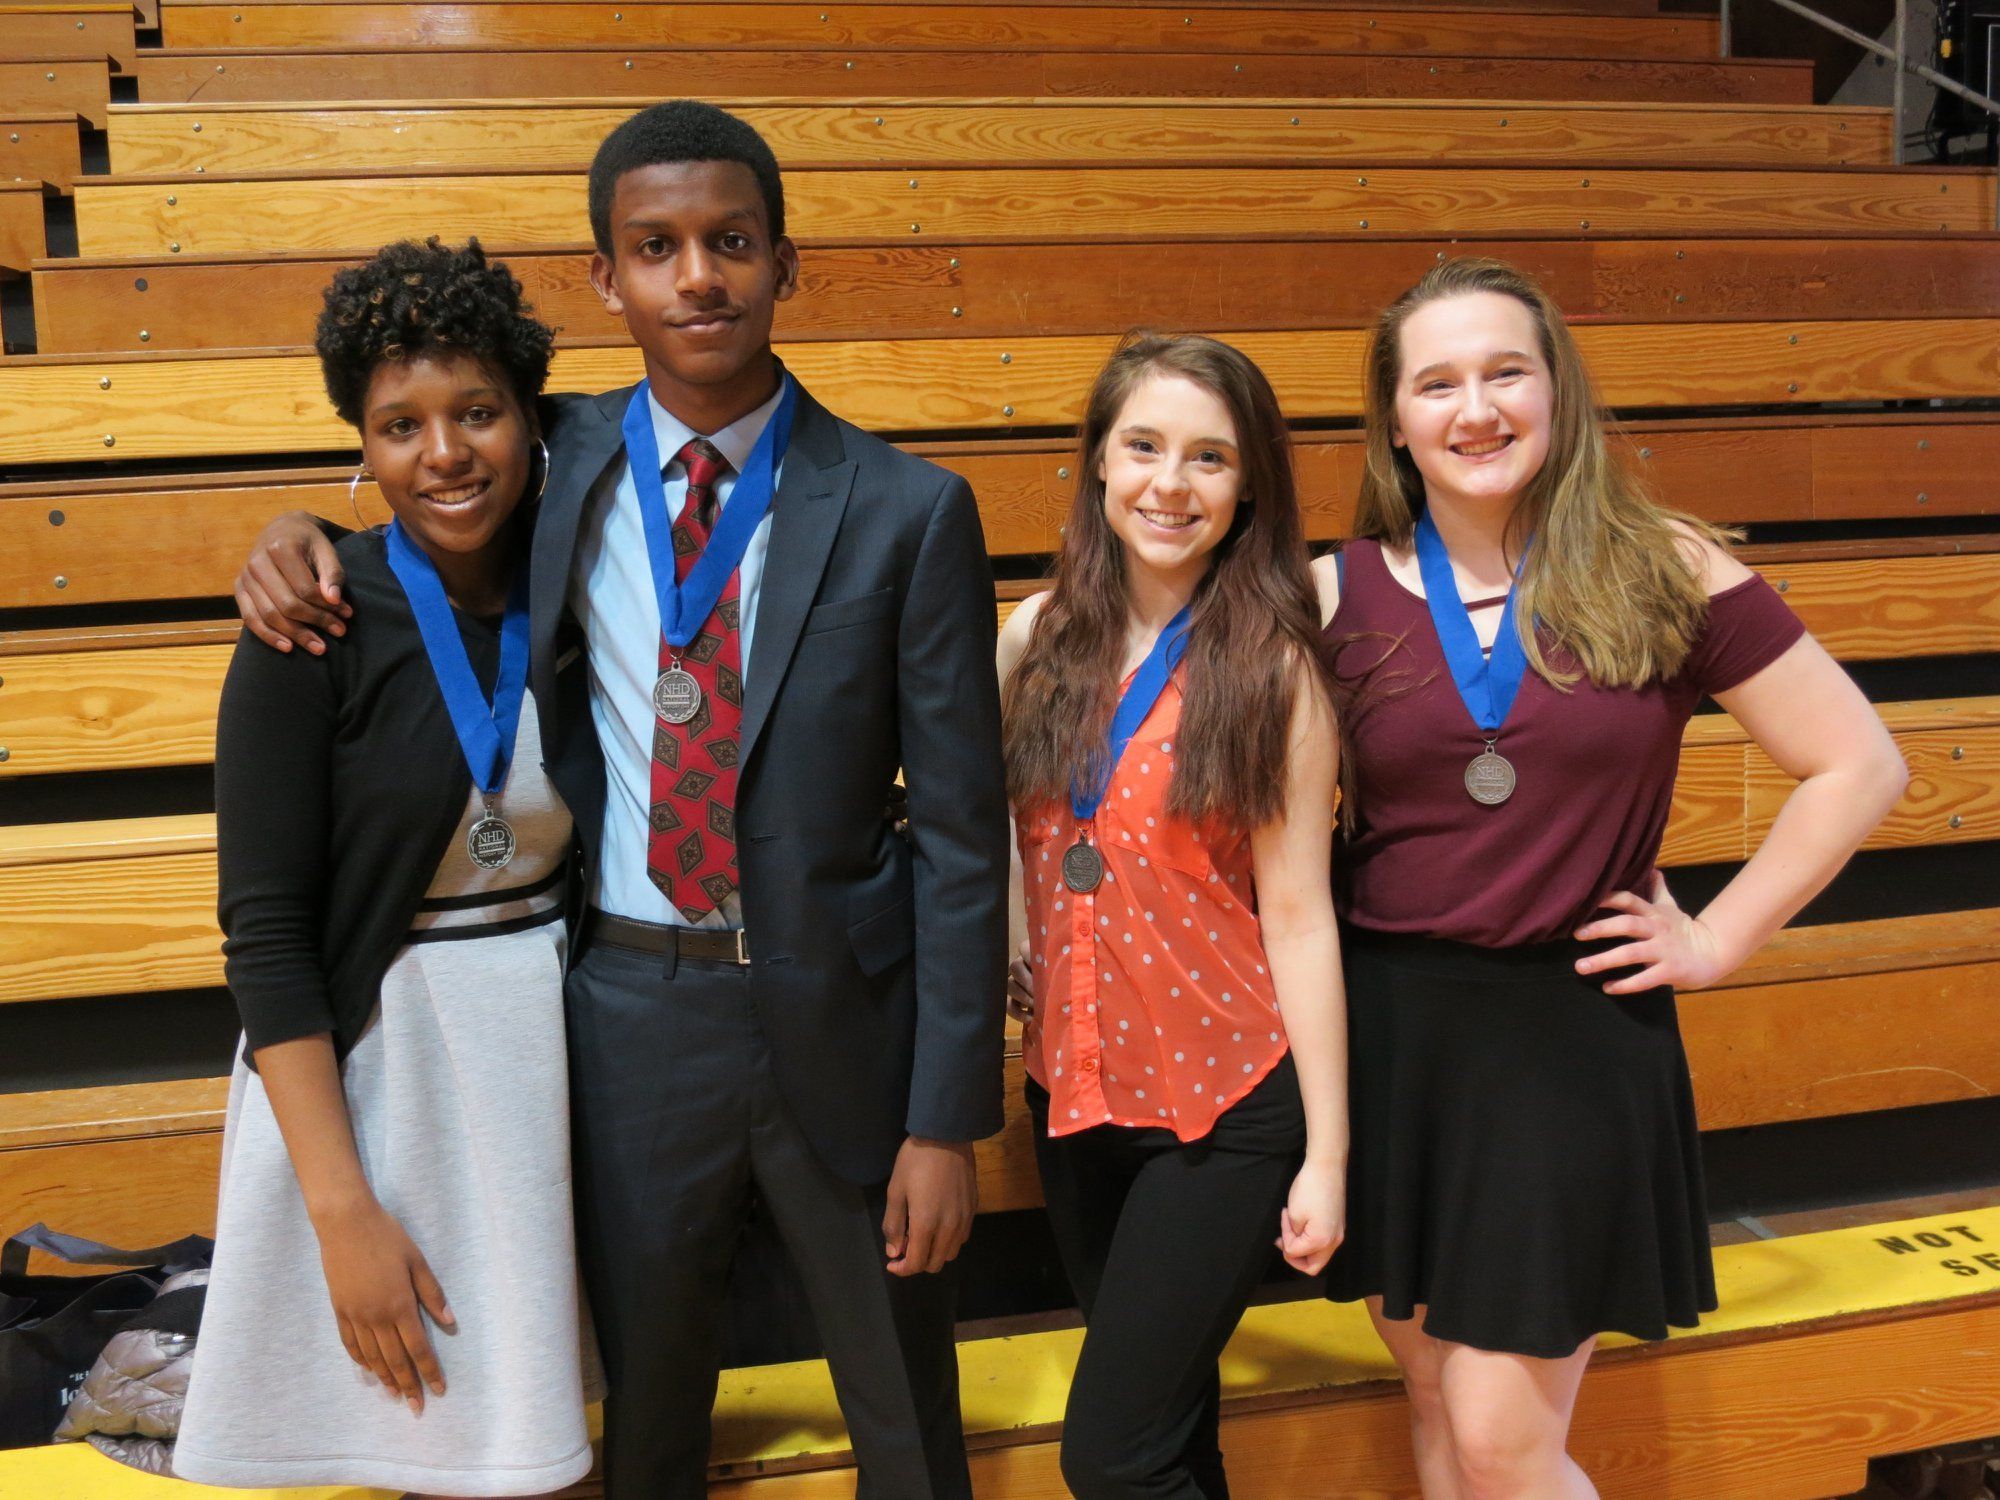 Four students stand together, each with medals around their necks 